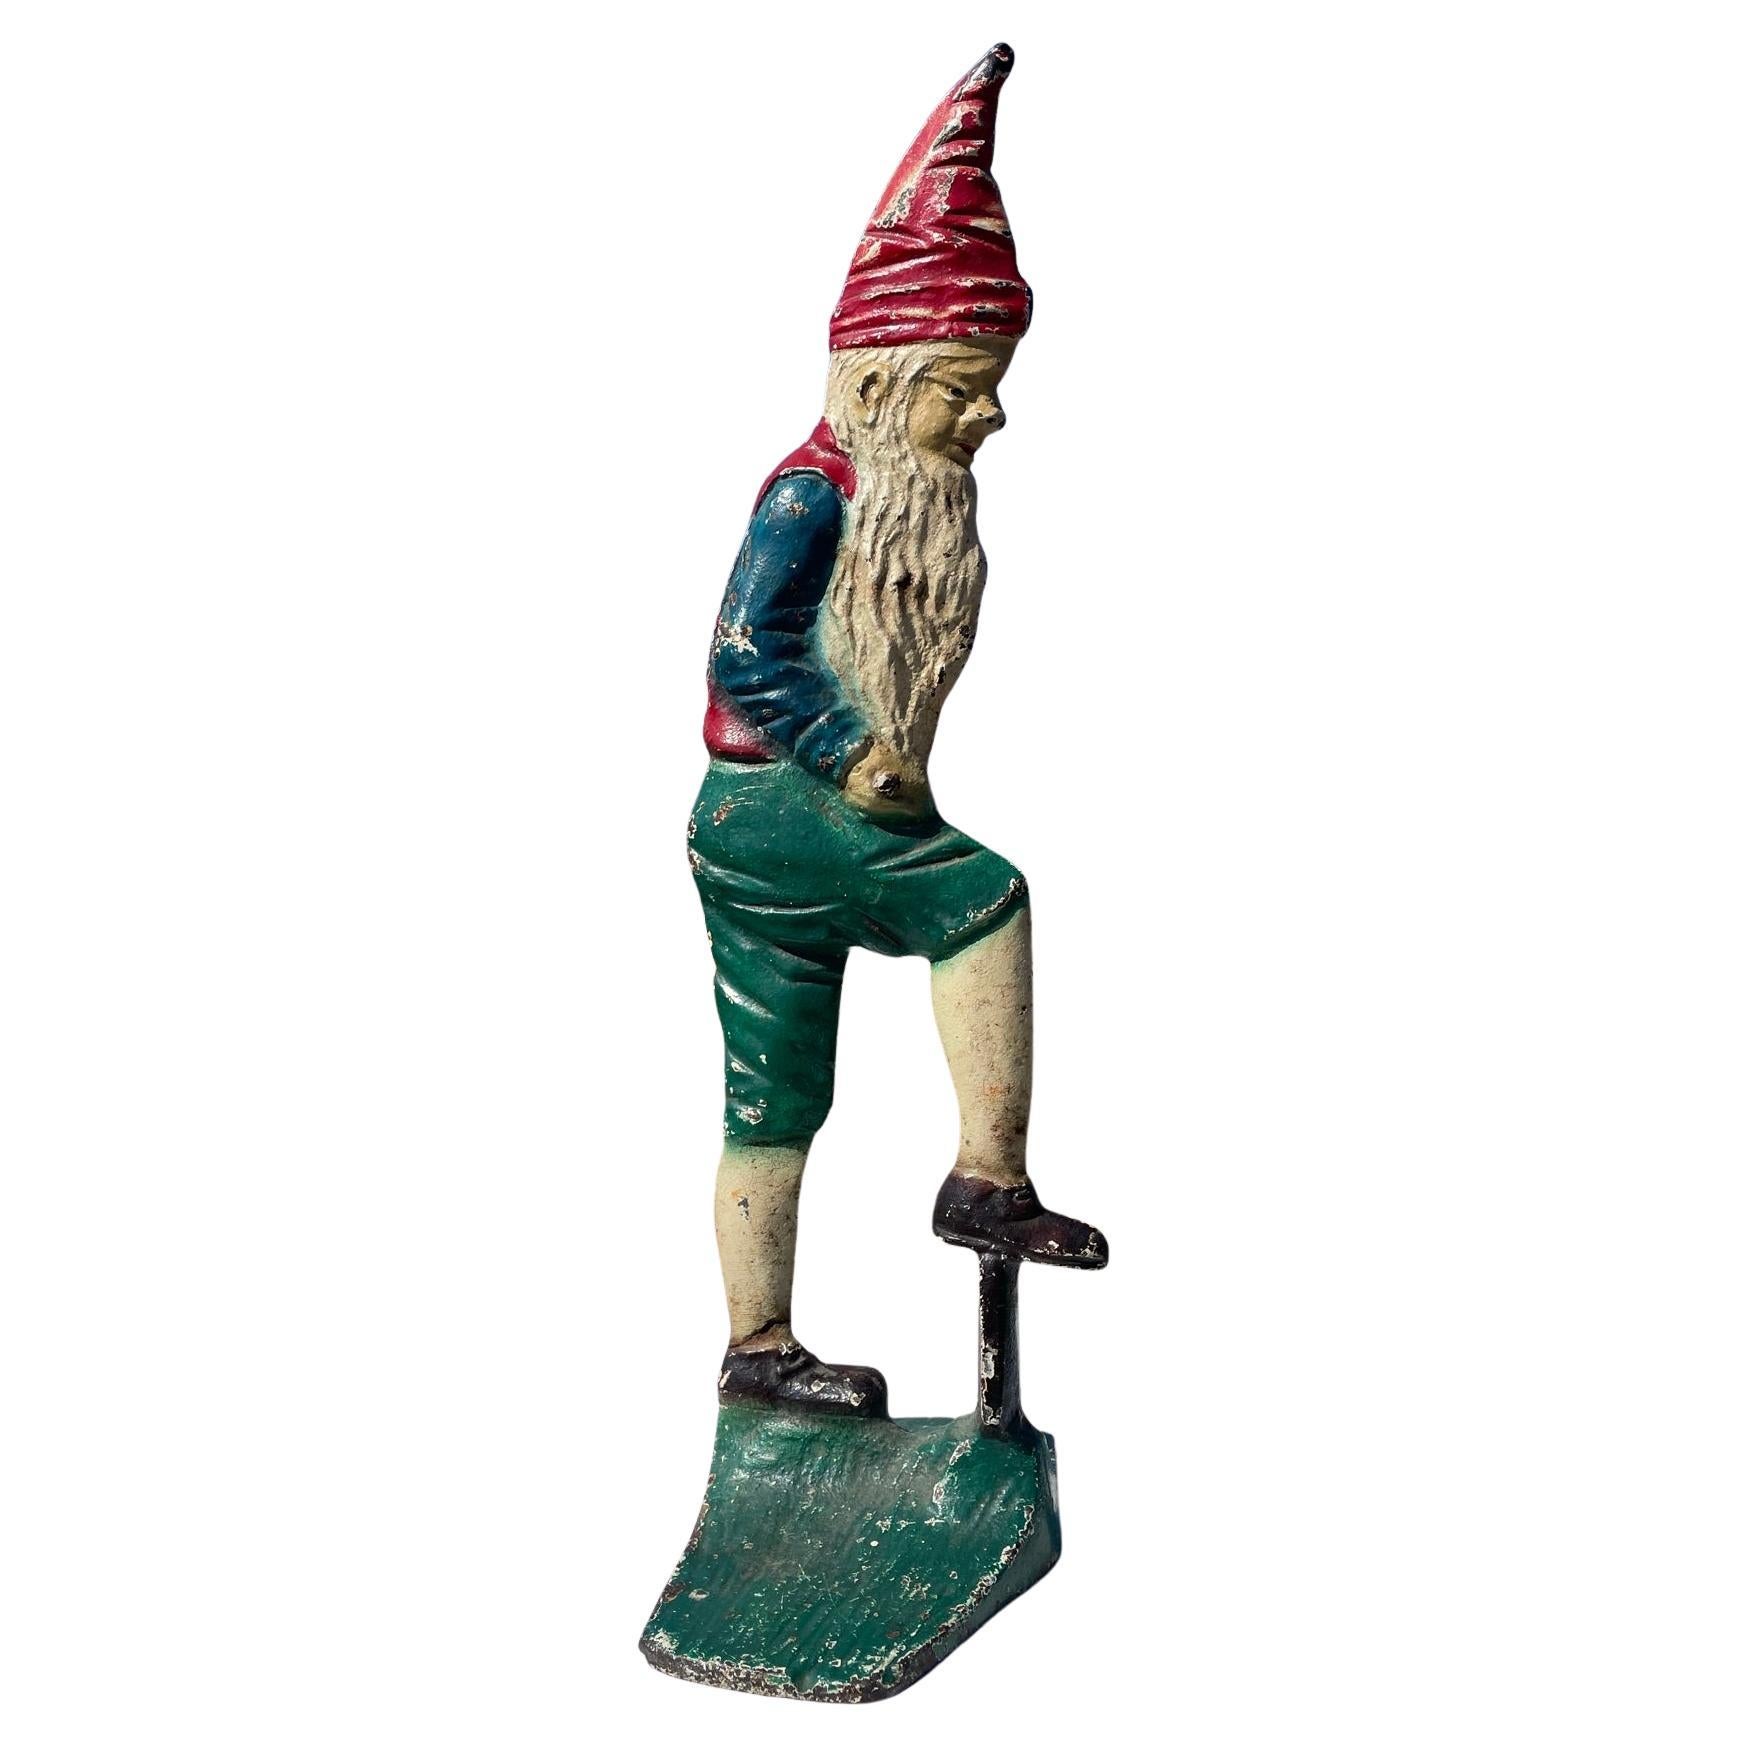 What is a gnome and what does it represent?